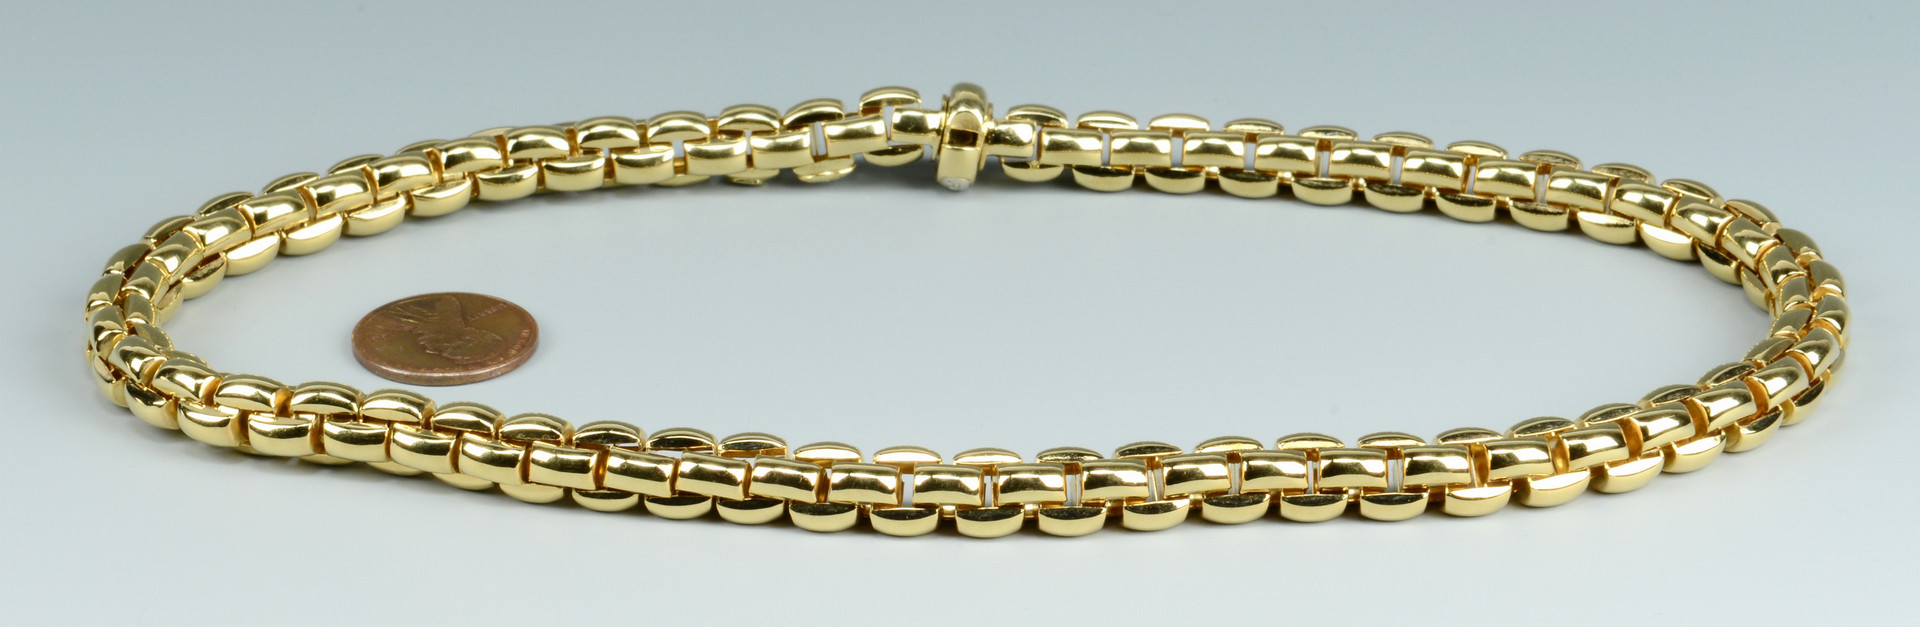 Lot 106: Fope 18k Gold Necklace, 67.7 grams